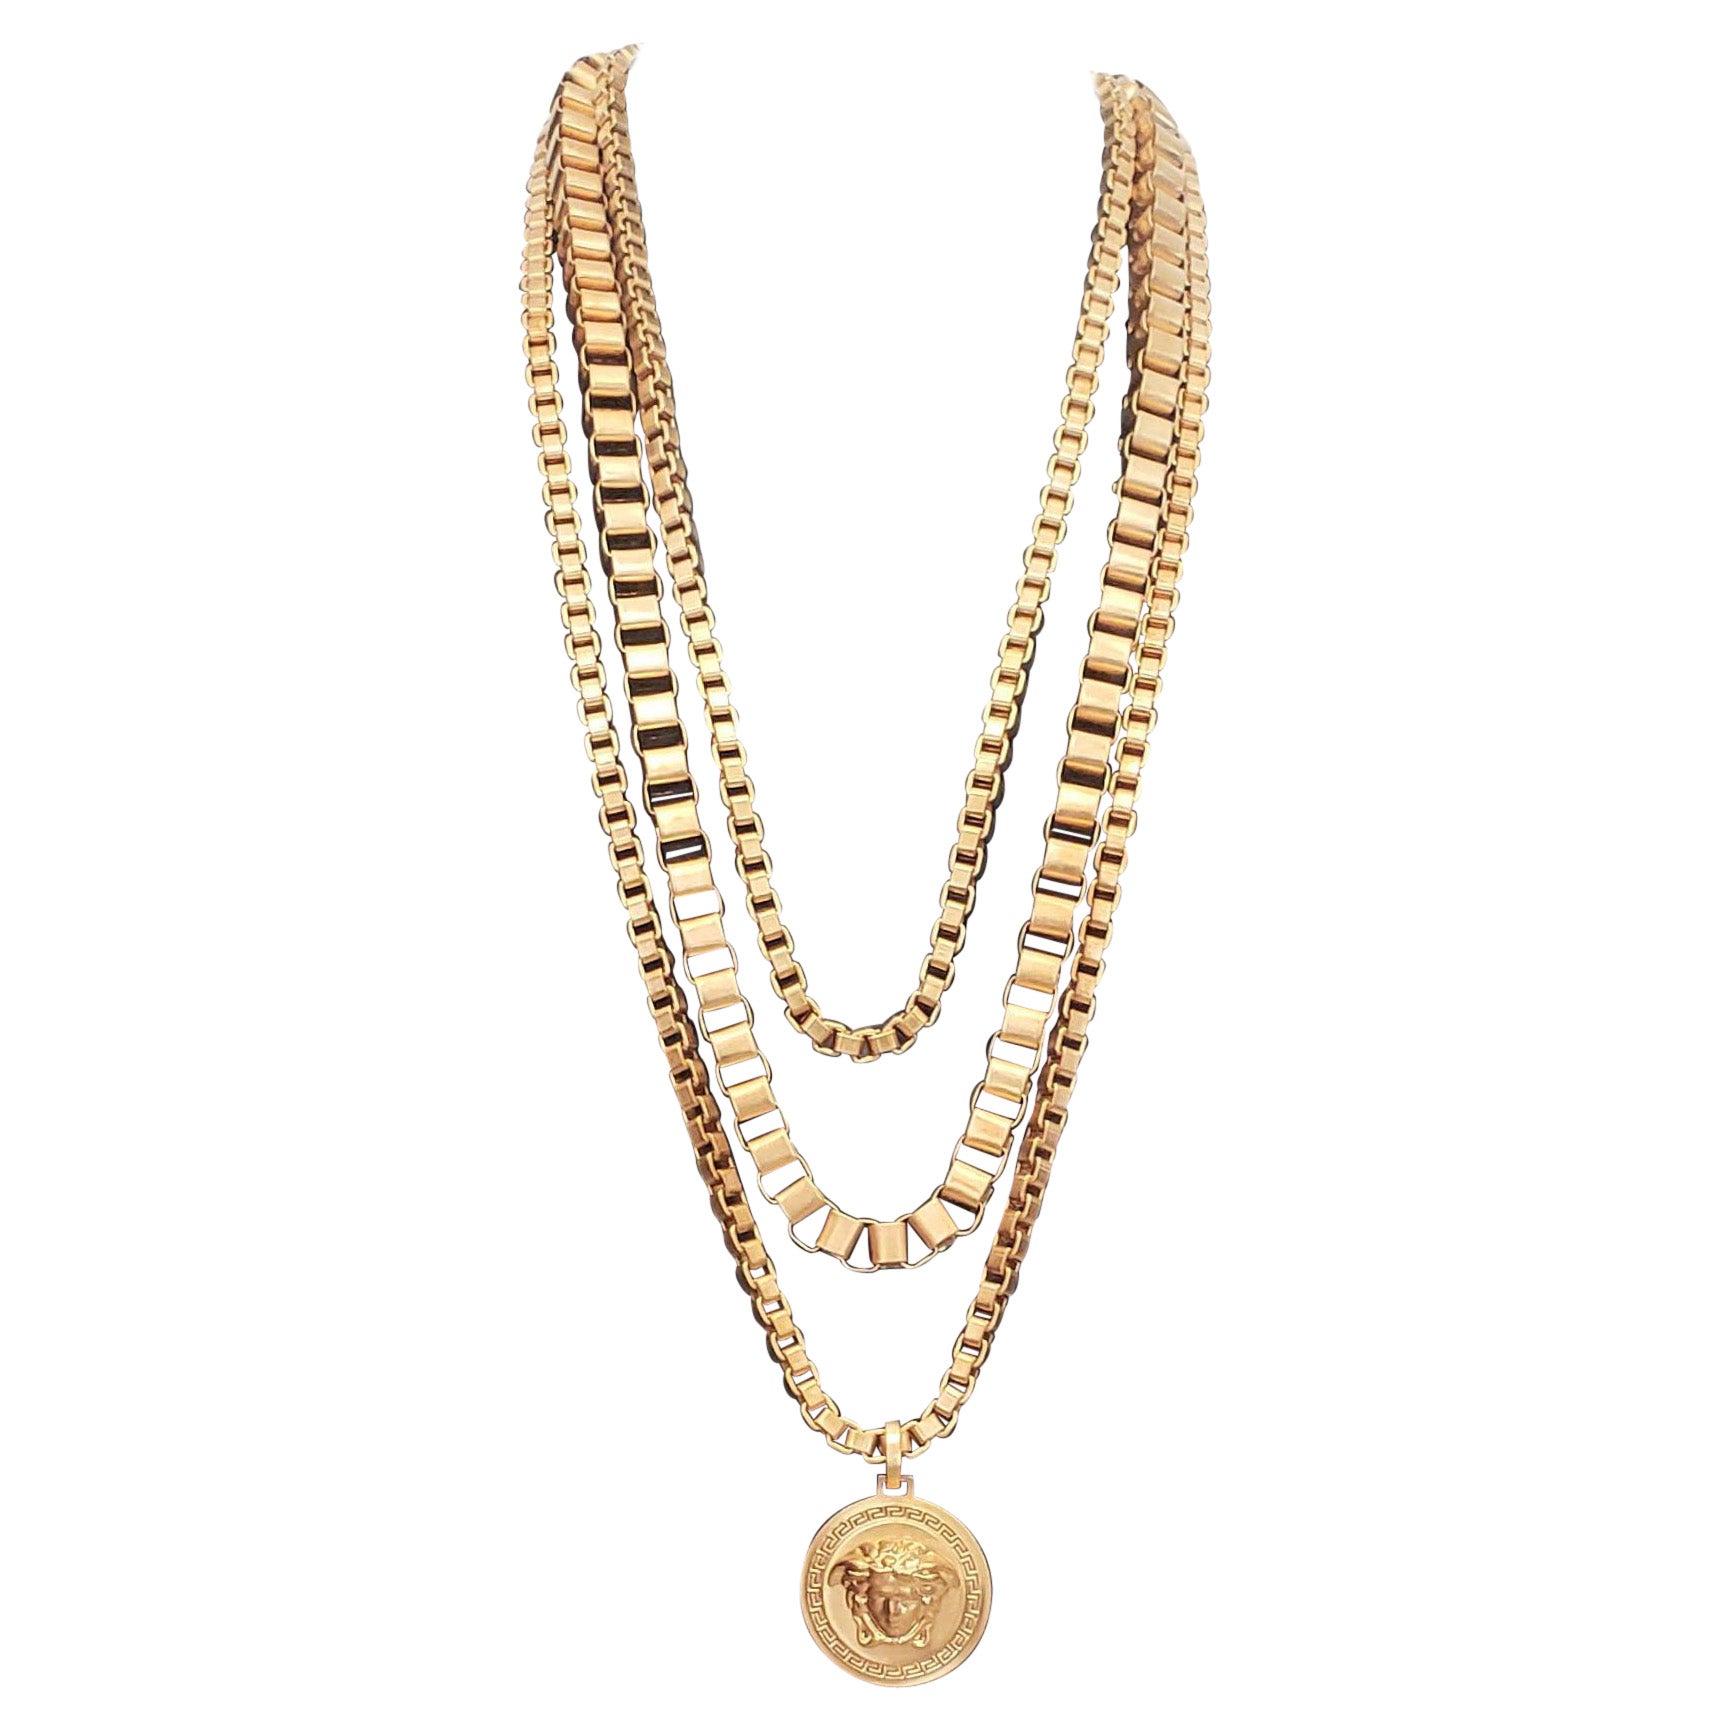 New Versace Runway 24K Gold Plated Medusa Chain Necklace as seen on ...